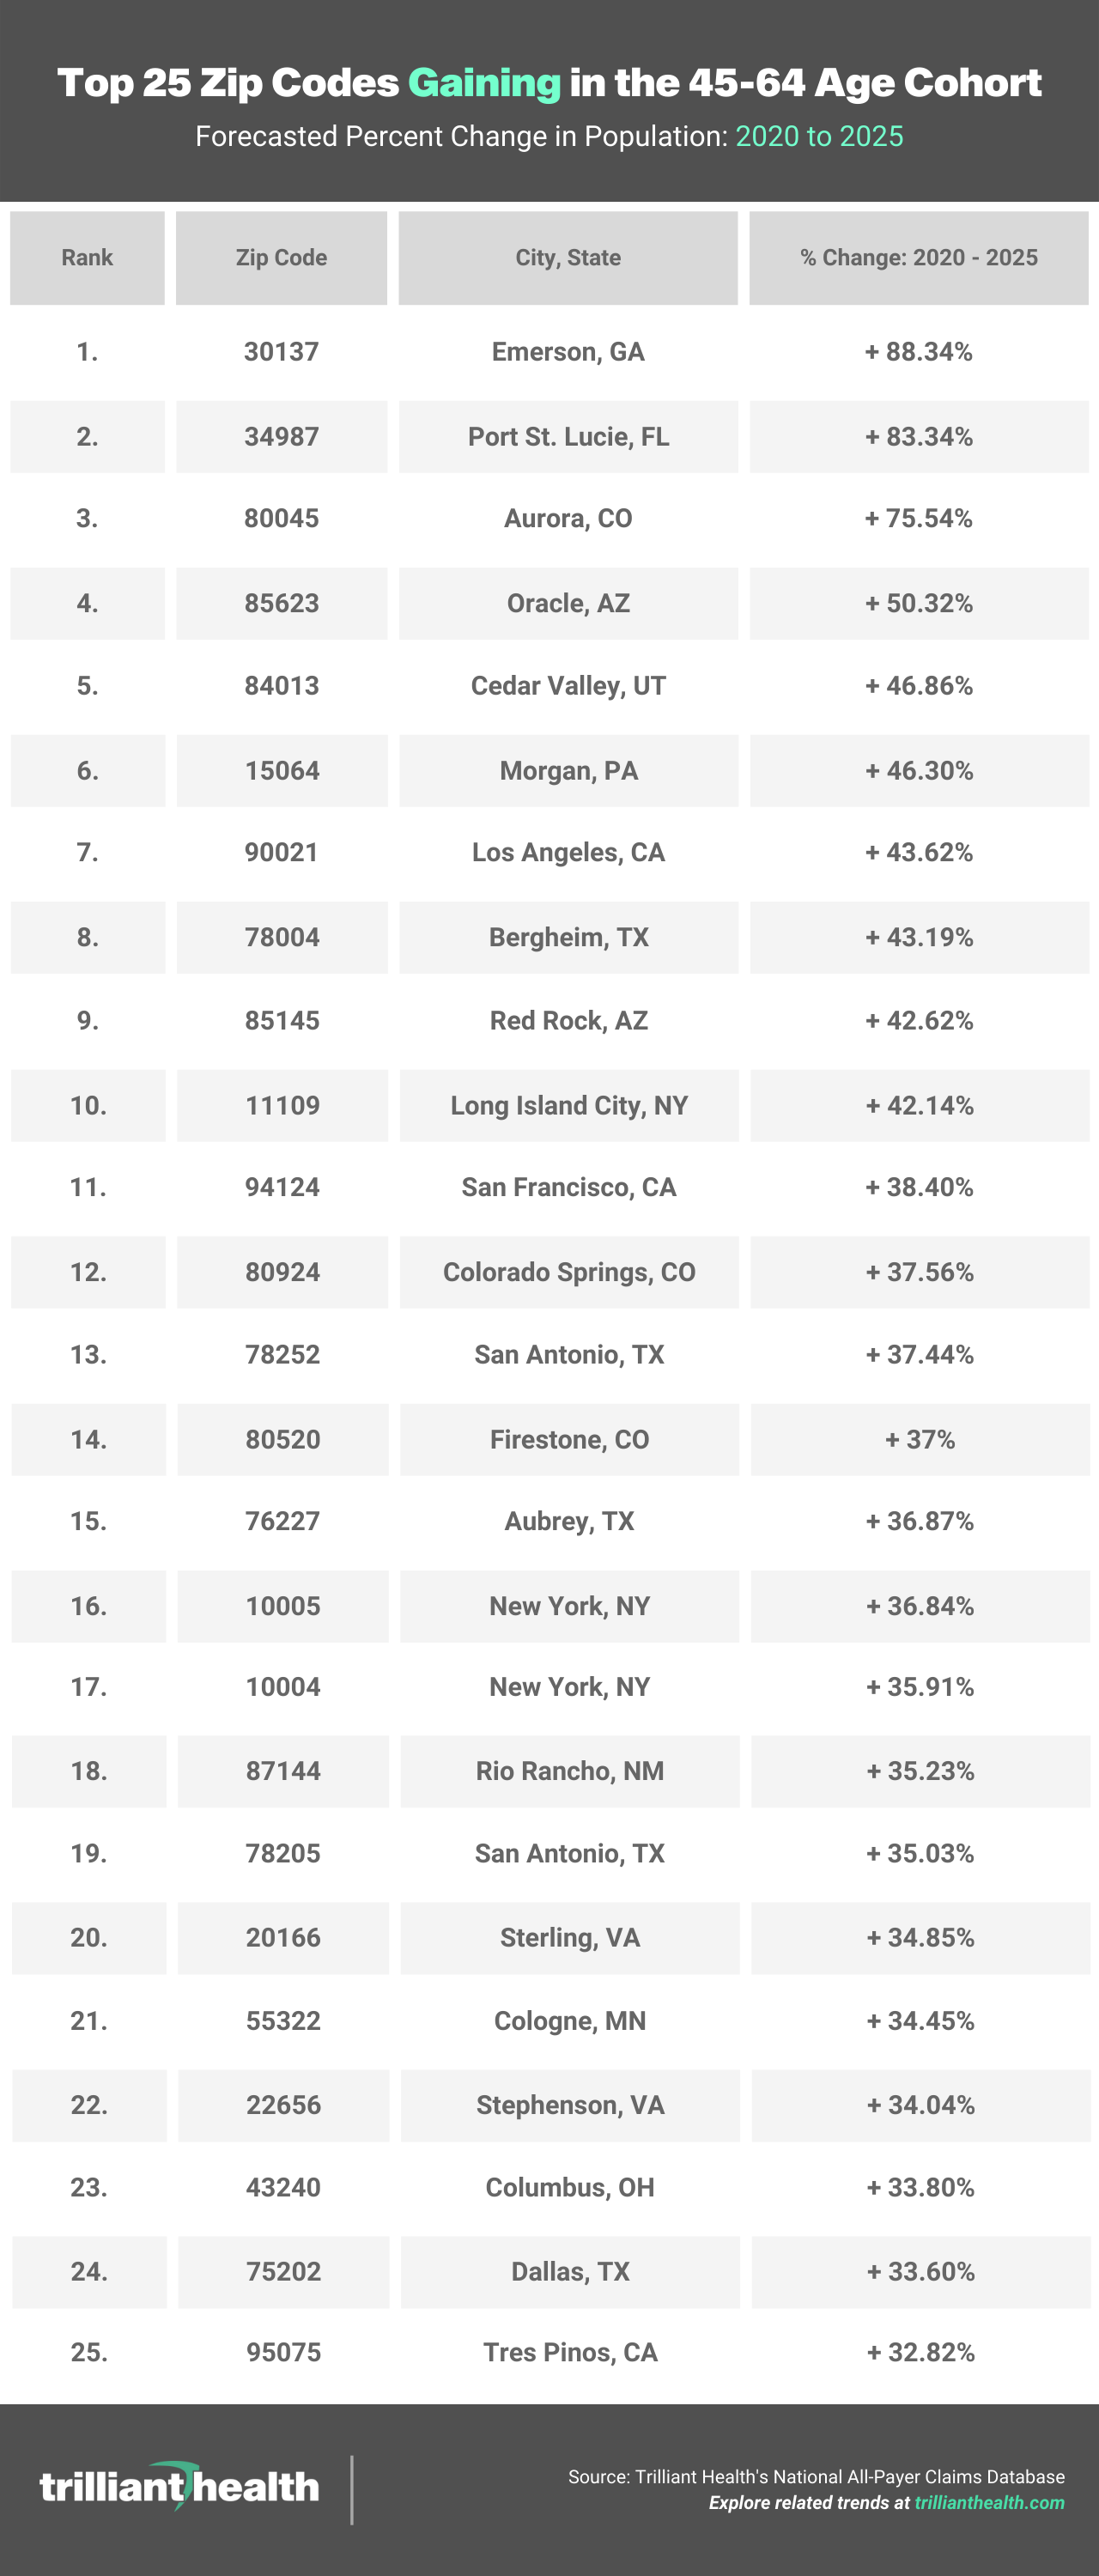 Top 25 Zip Codes Gaining in the 45-64 Age Cohort